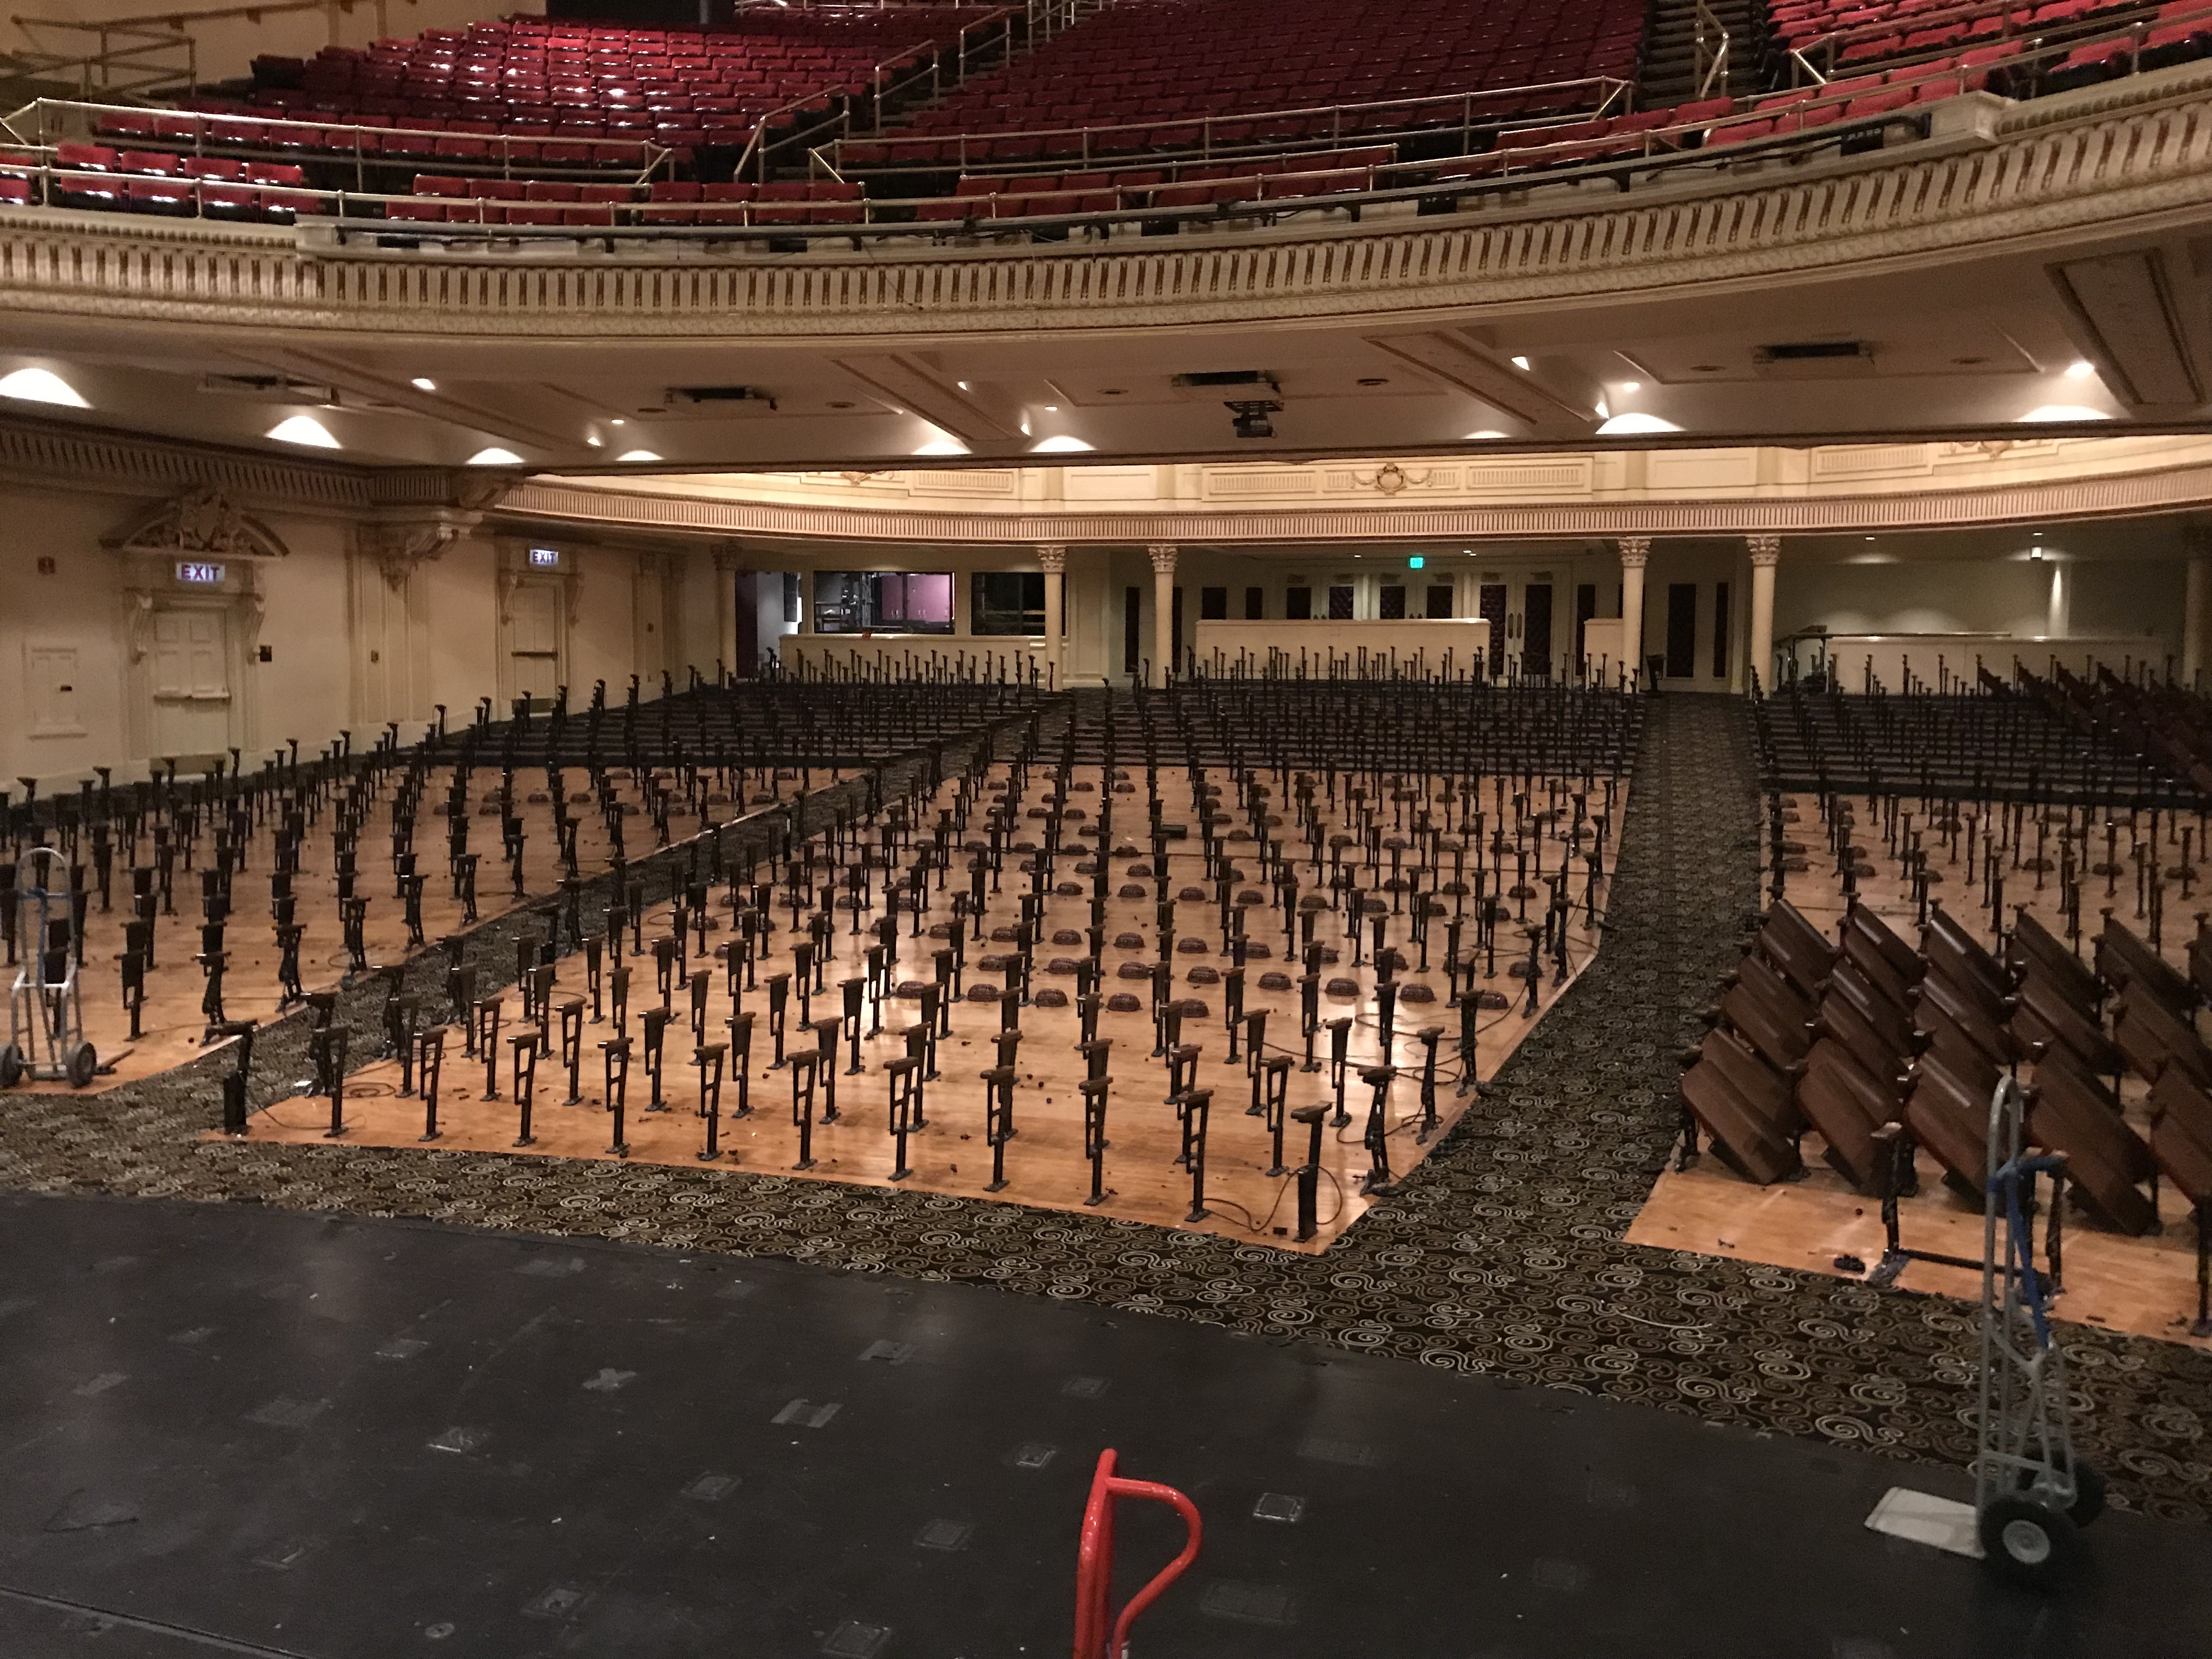 Capitol Theatre Orchestra Level – with no chairs!